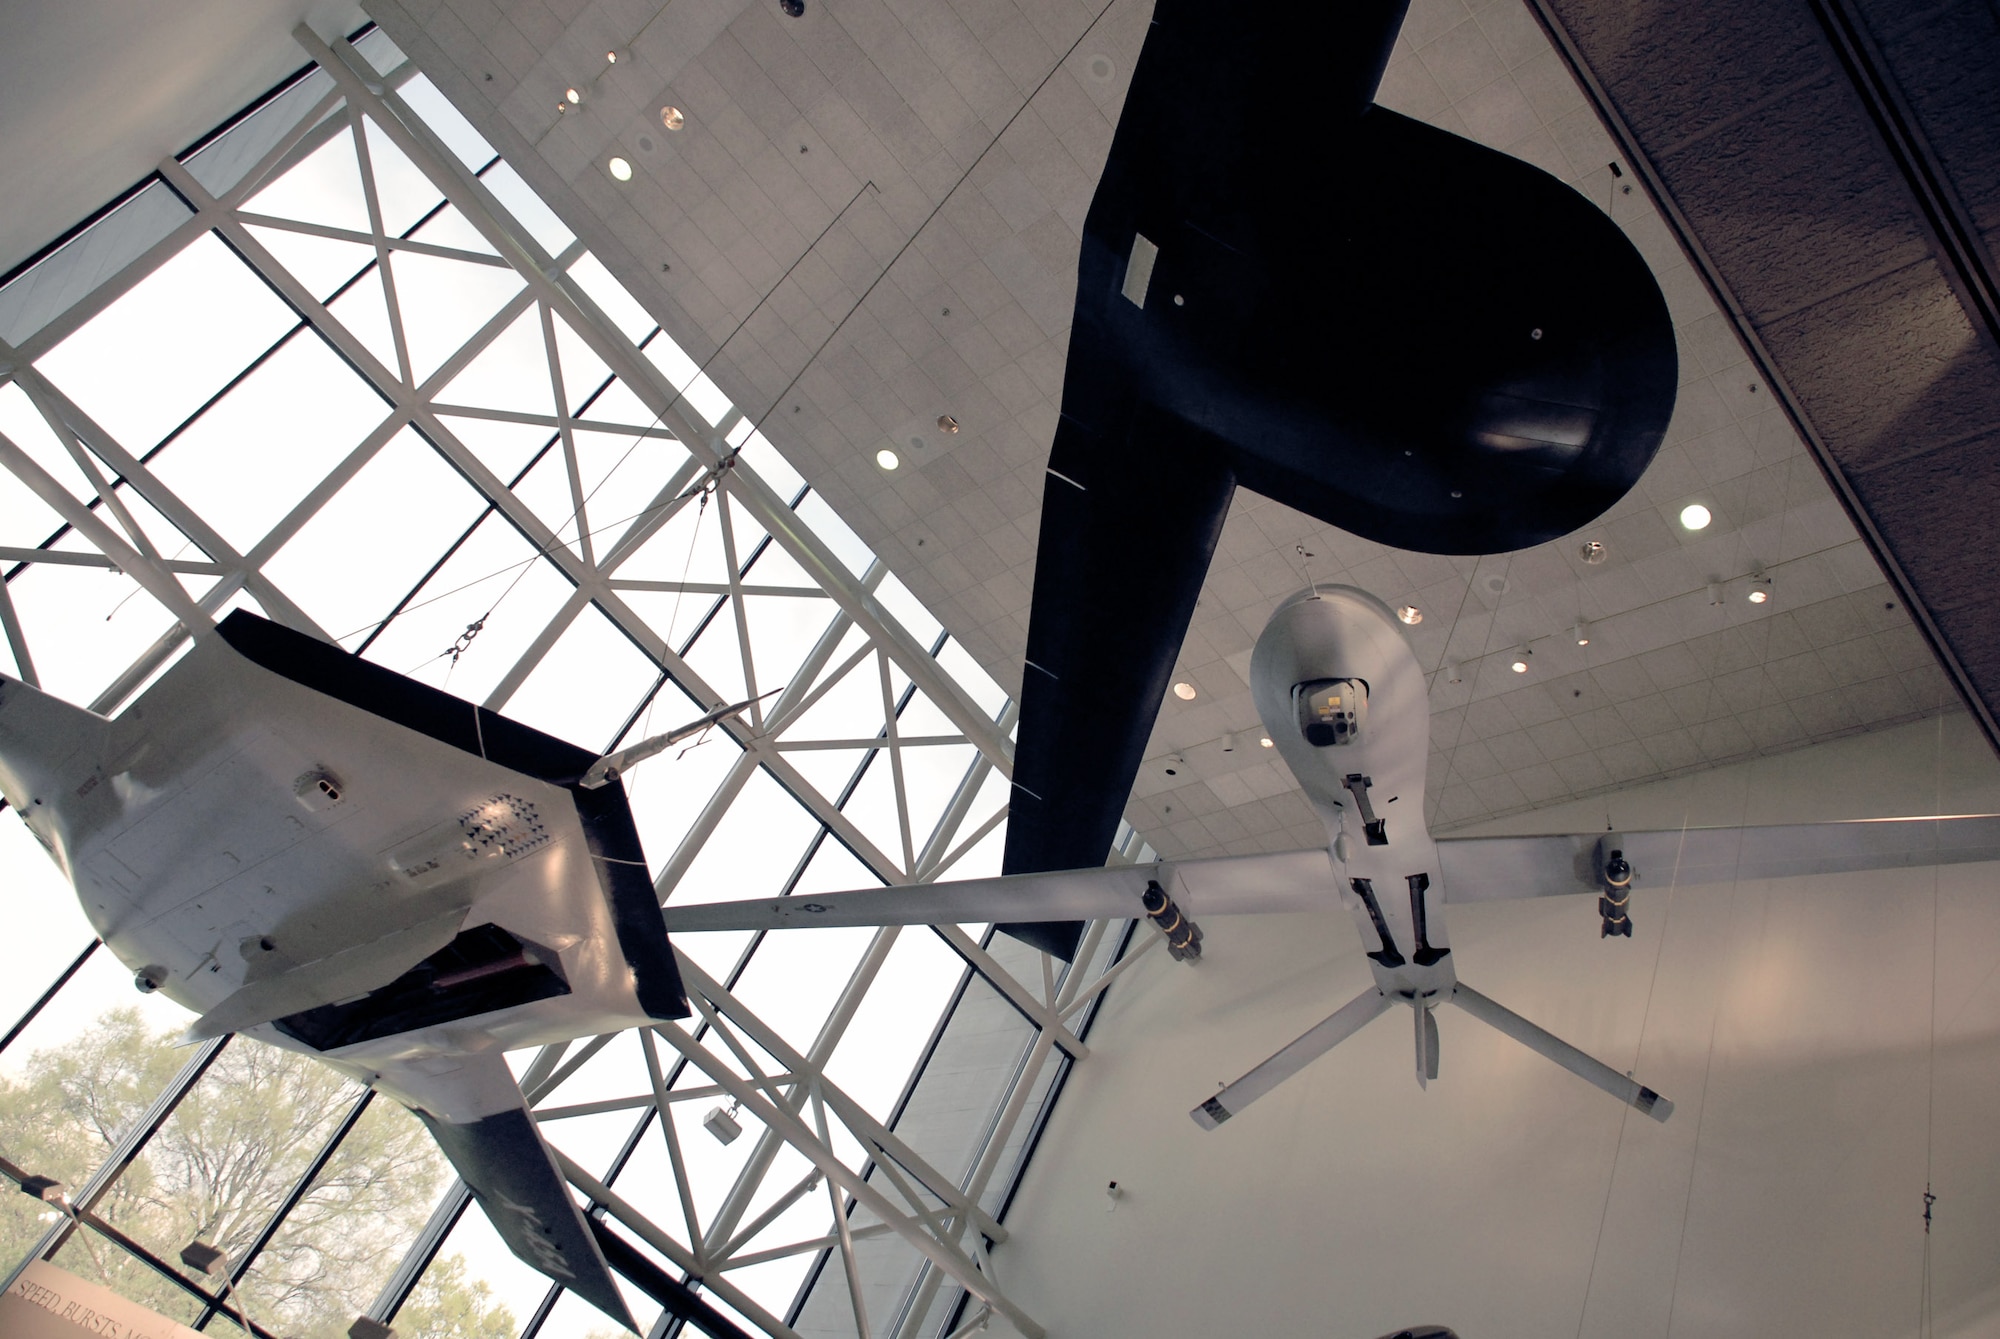 An RQ-3A Darkstar (top), MQ-1L Predator A (right) and X-45A Joint Unmanned Combat Air System (left) hang in the Smithsonian Institution's National Air and Space Museum in a new exhibit of military unmanned aerial vehicles. The exhibit, which opened to the public April 24, includes six UAVs from all four services and will be on display for the next 10 years.  (U.S. Air Force photo/Staff Sgt. J.G. Buzanowski)